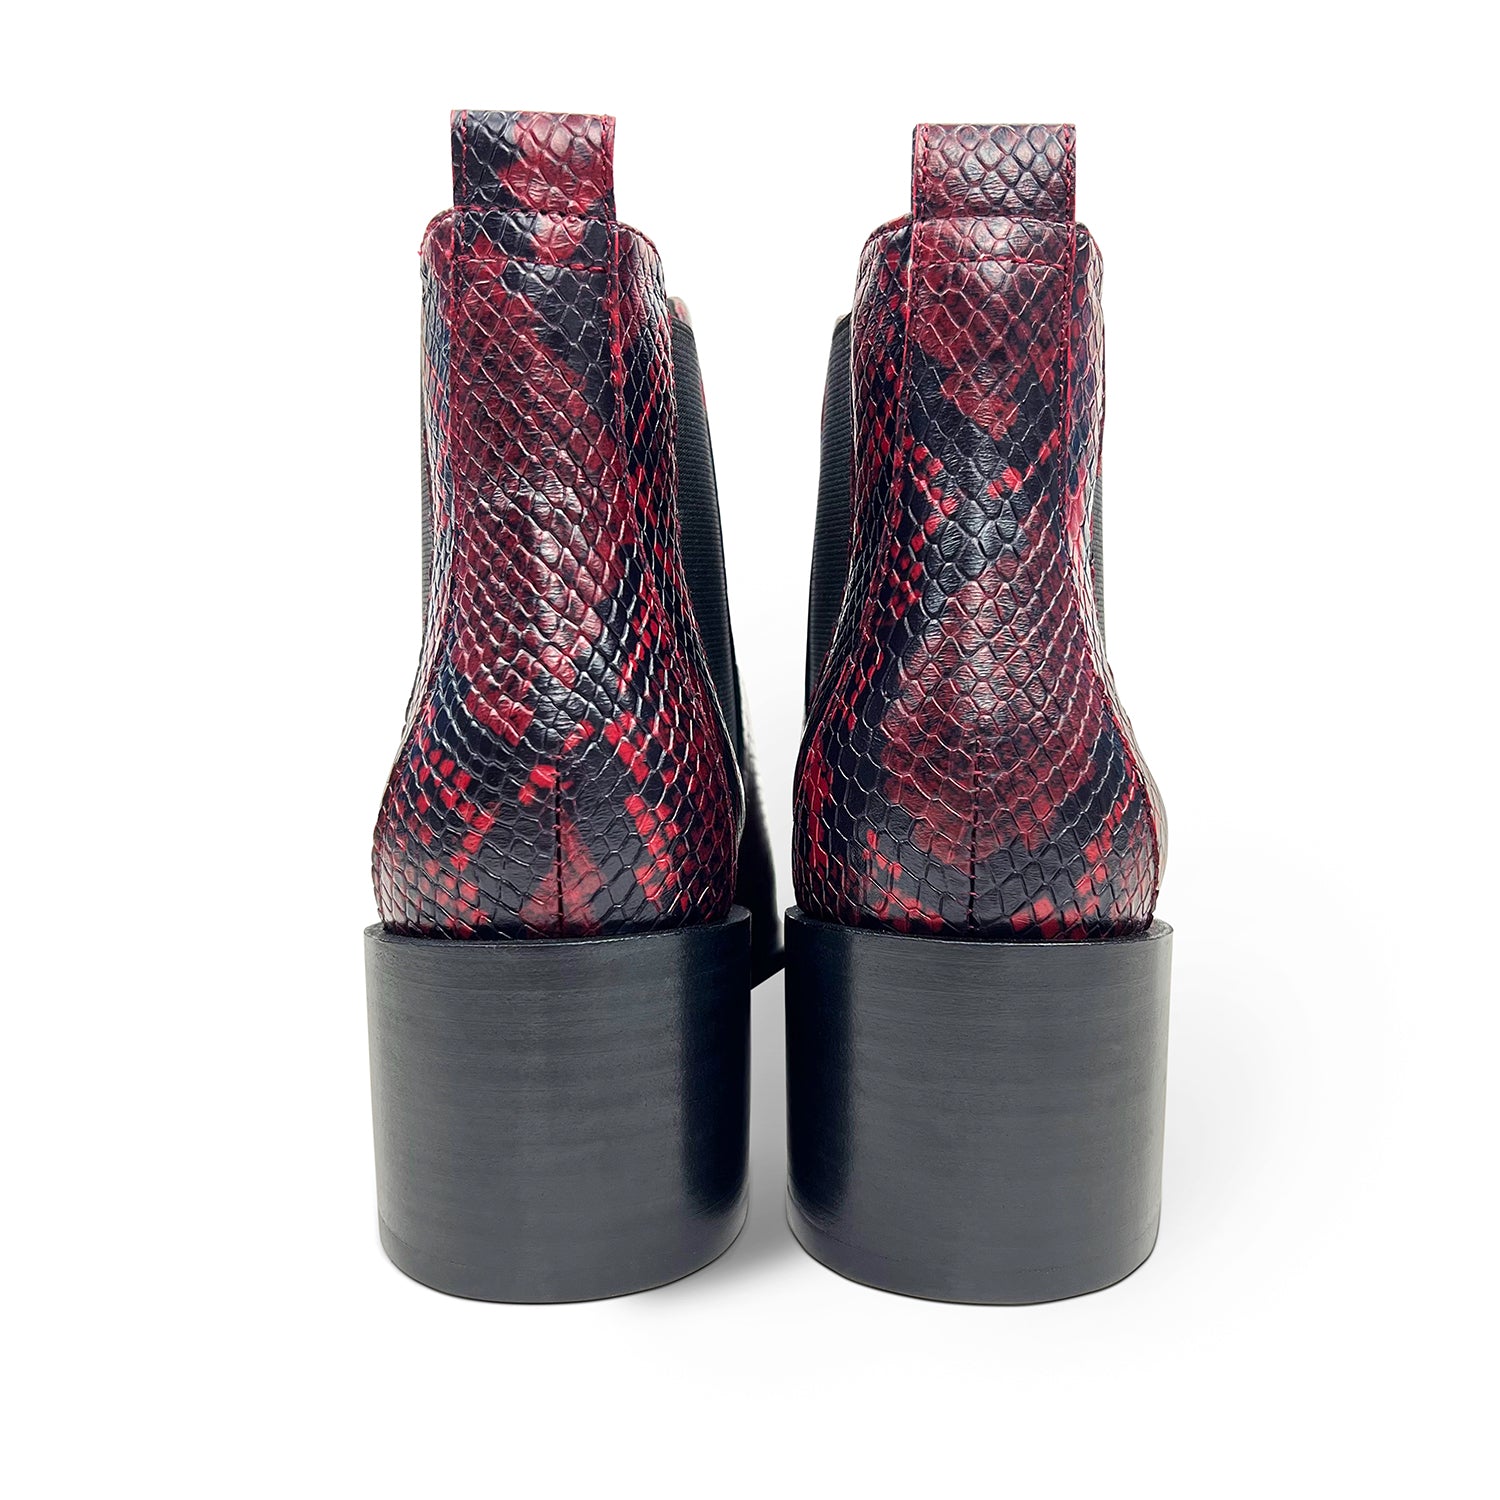 Melissa Chelsea Boot in Red Snake Leather